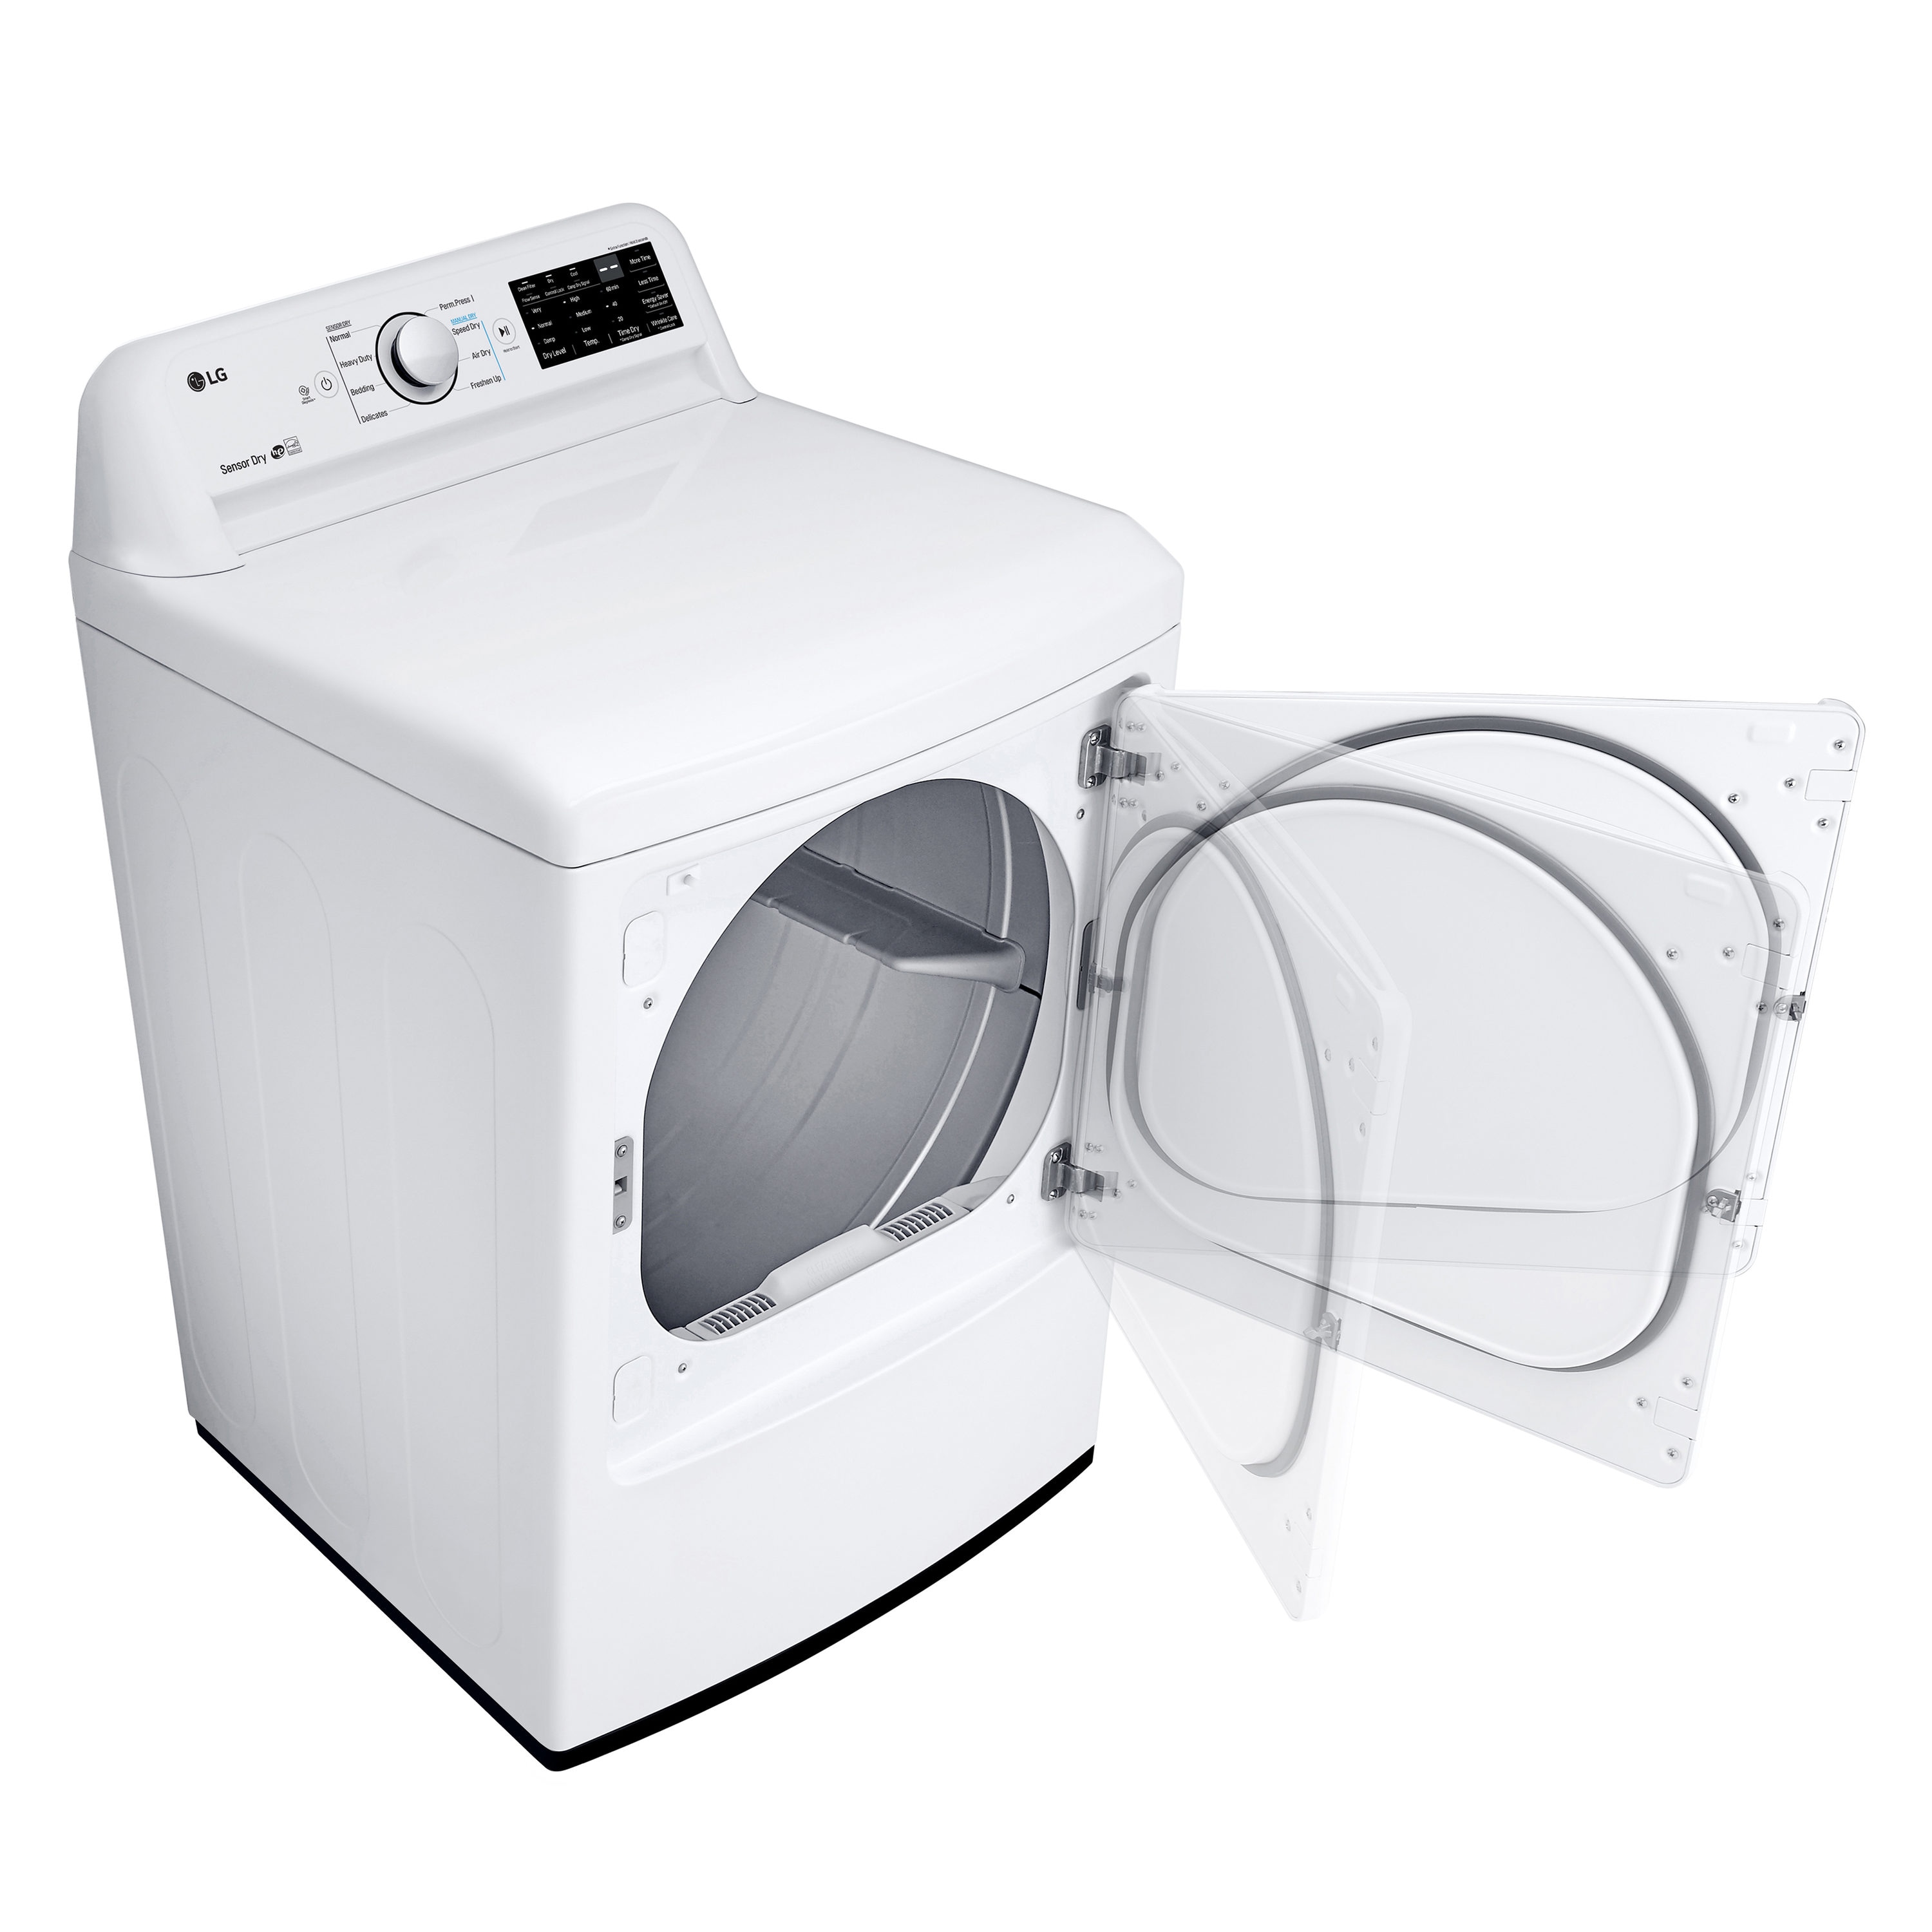 What is this clear belt called for the Sentern Portable electric dryer 3.5  Cu FT? : r/Appliances